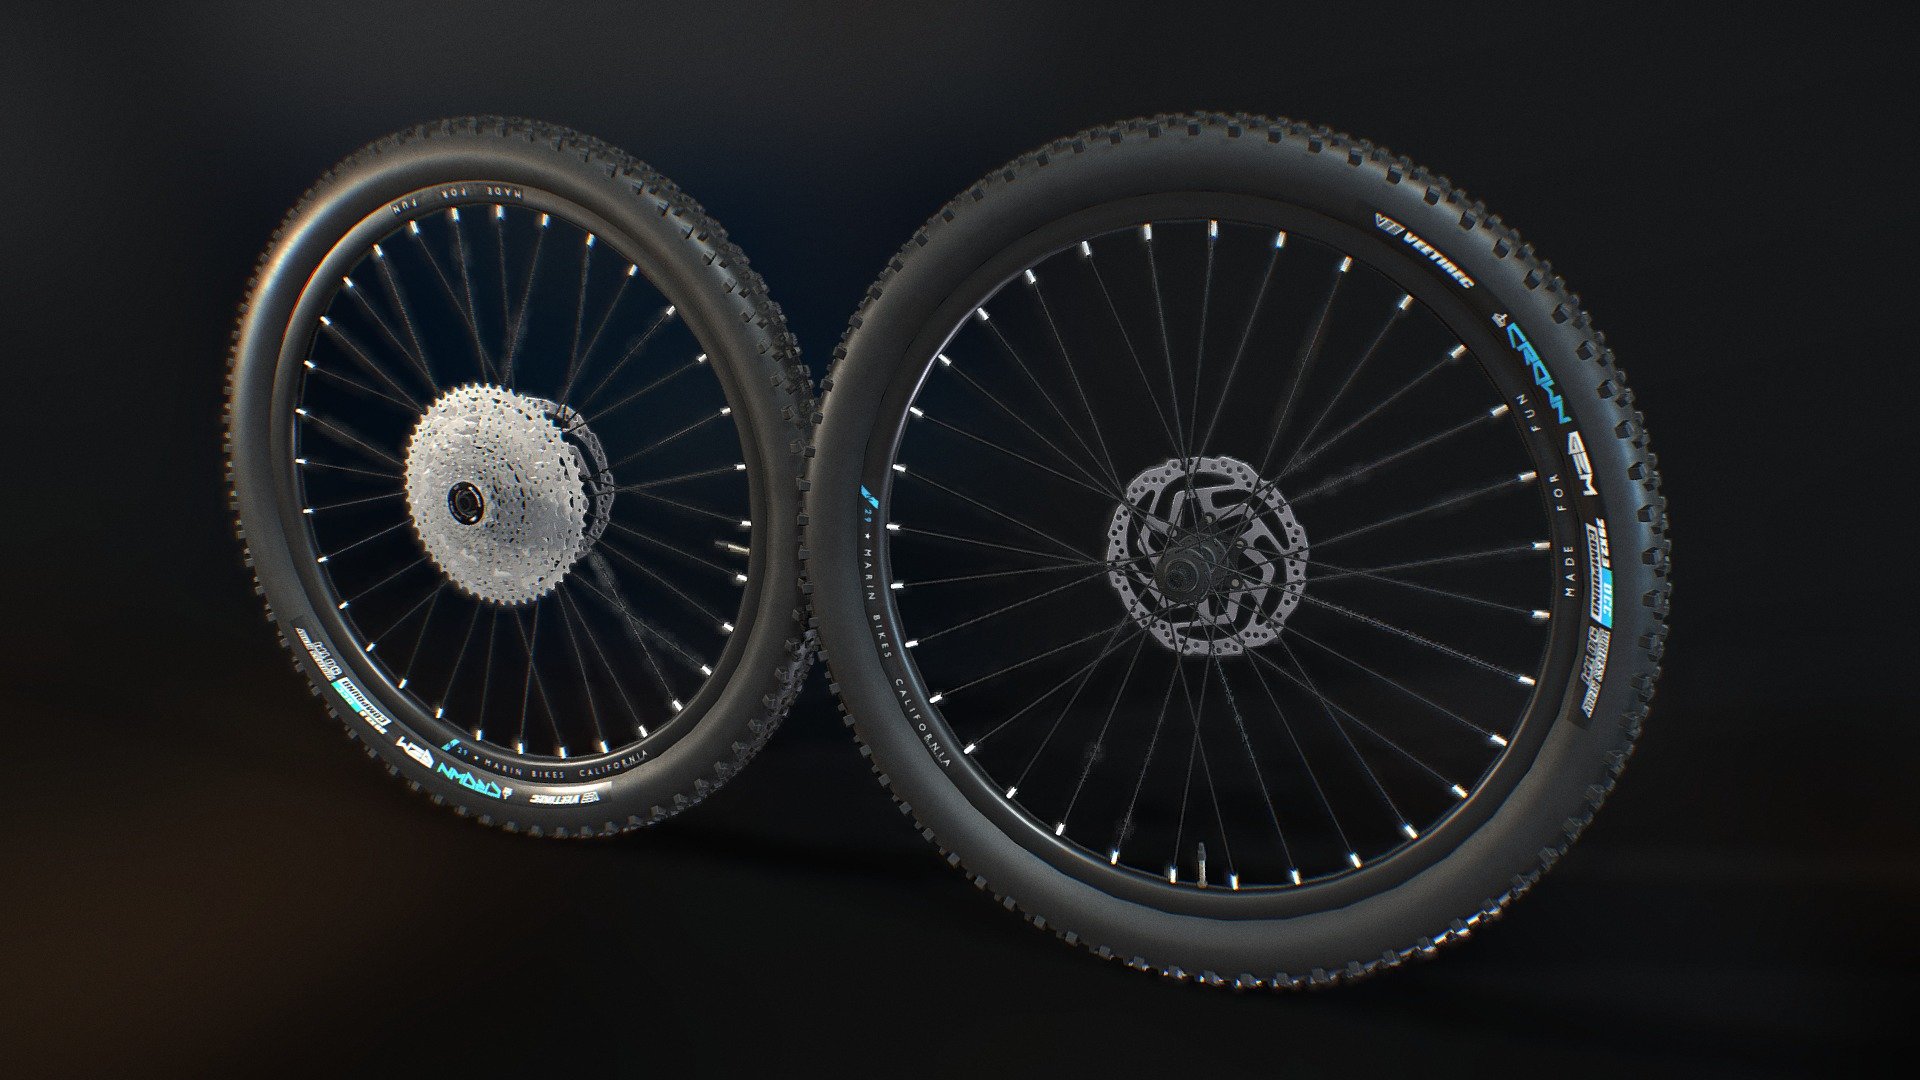 This is a 3d model of mountain bike wheel ready for using as bicycle components. It is a 29inch wheel for downhill, enduro, trail, crosscountry MTBs.This product consists of rim, tyre,hubs,disc rotors and 11speed 11-51T Cassette.

This model is created in Blender and textured in Substance Painter.

This model is made in real proportions.

High quality of PBR texture maps are available to download 3d model